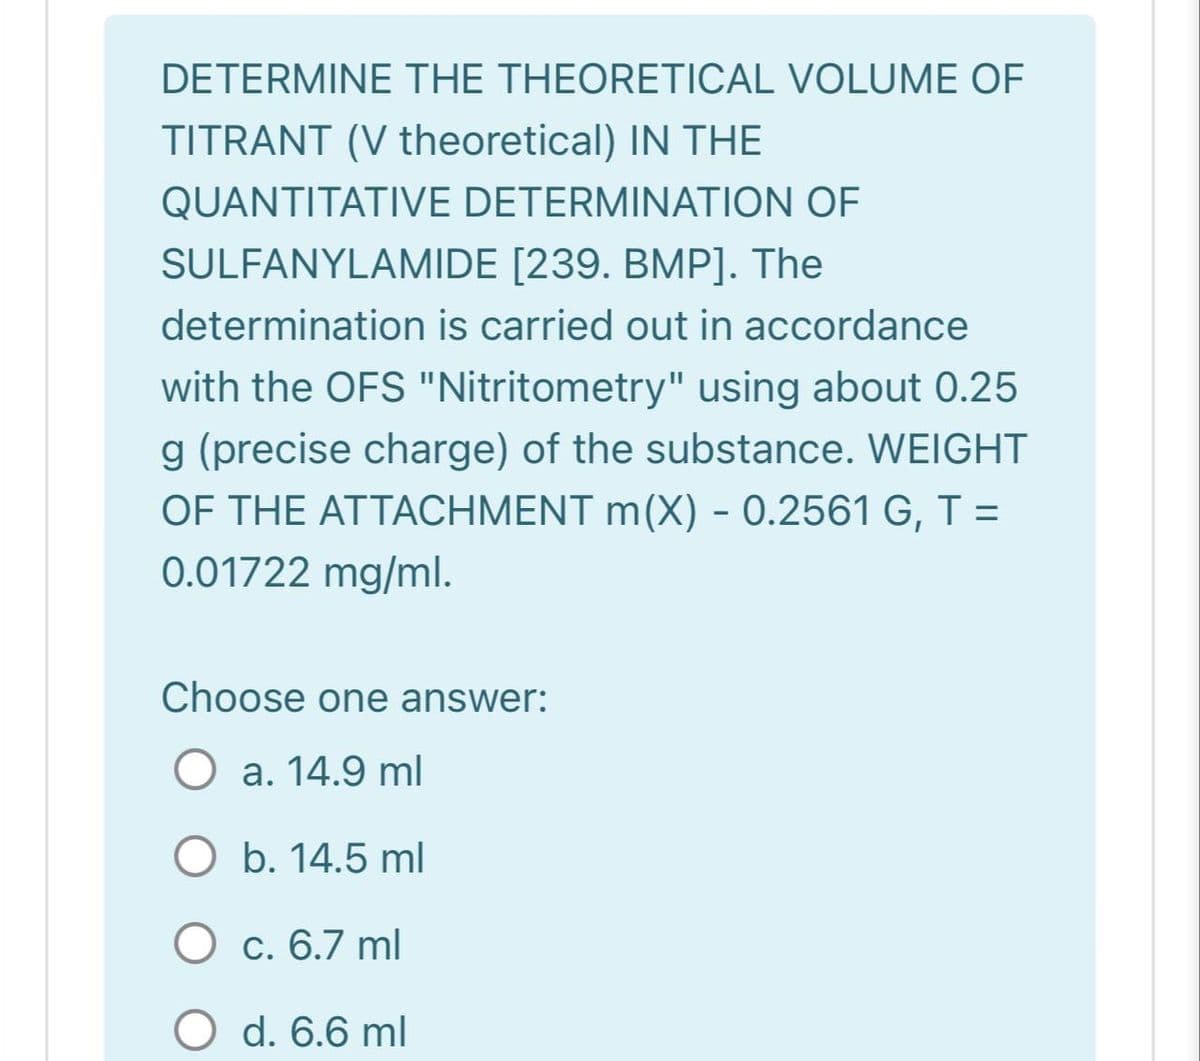 DETERMINE THE THEORETICAL VOLUME OF
TITRANT (V theoretical) IN THE
QUANTITATIVE DETERMINATION OF
SULFANYLAMIDE [239. BMP]. The
determination is carried out in accordance
with the OFS "Nitritometry" using about 0.25
g (precise charge) of the substance. WEIGHT
OF THE ATTACHMENT m(X) - 0.2561 G, T =
0.01722 mg/ml.
Choose one answer:
a. 14.9 ml
O b. 14.5 ml
O c. 6.7 ml
O d. 6.6 ml
